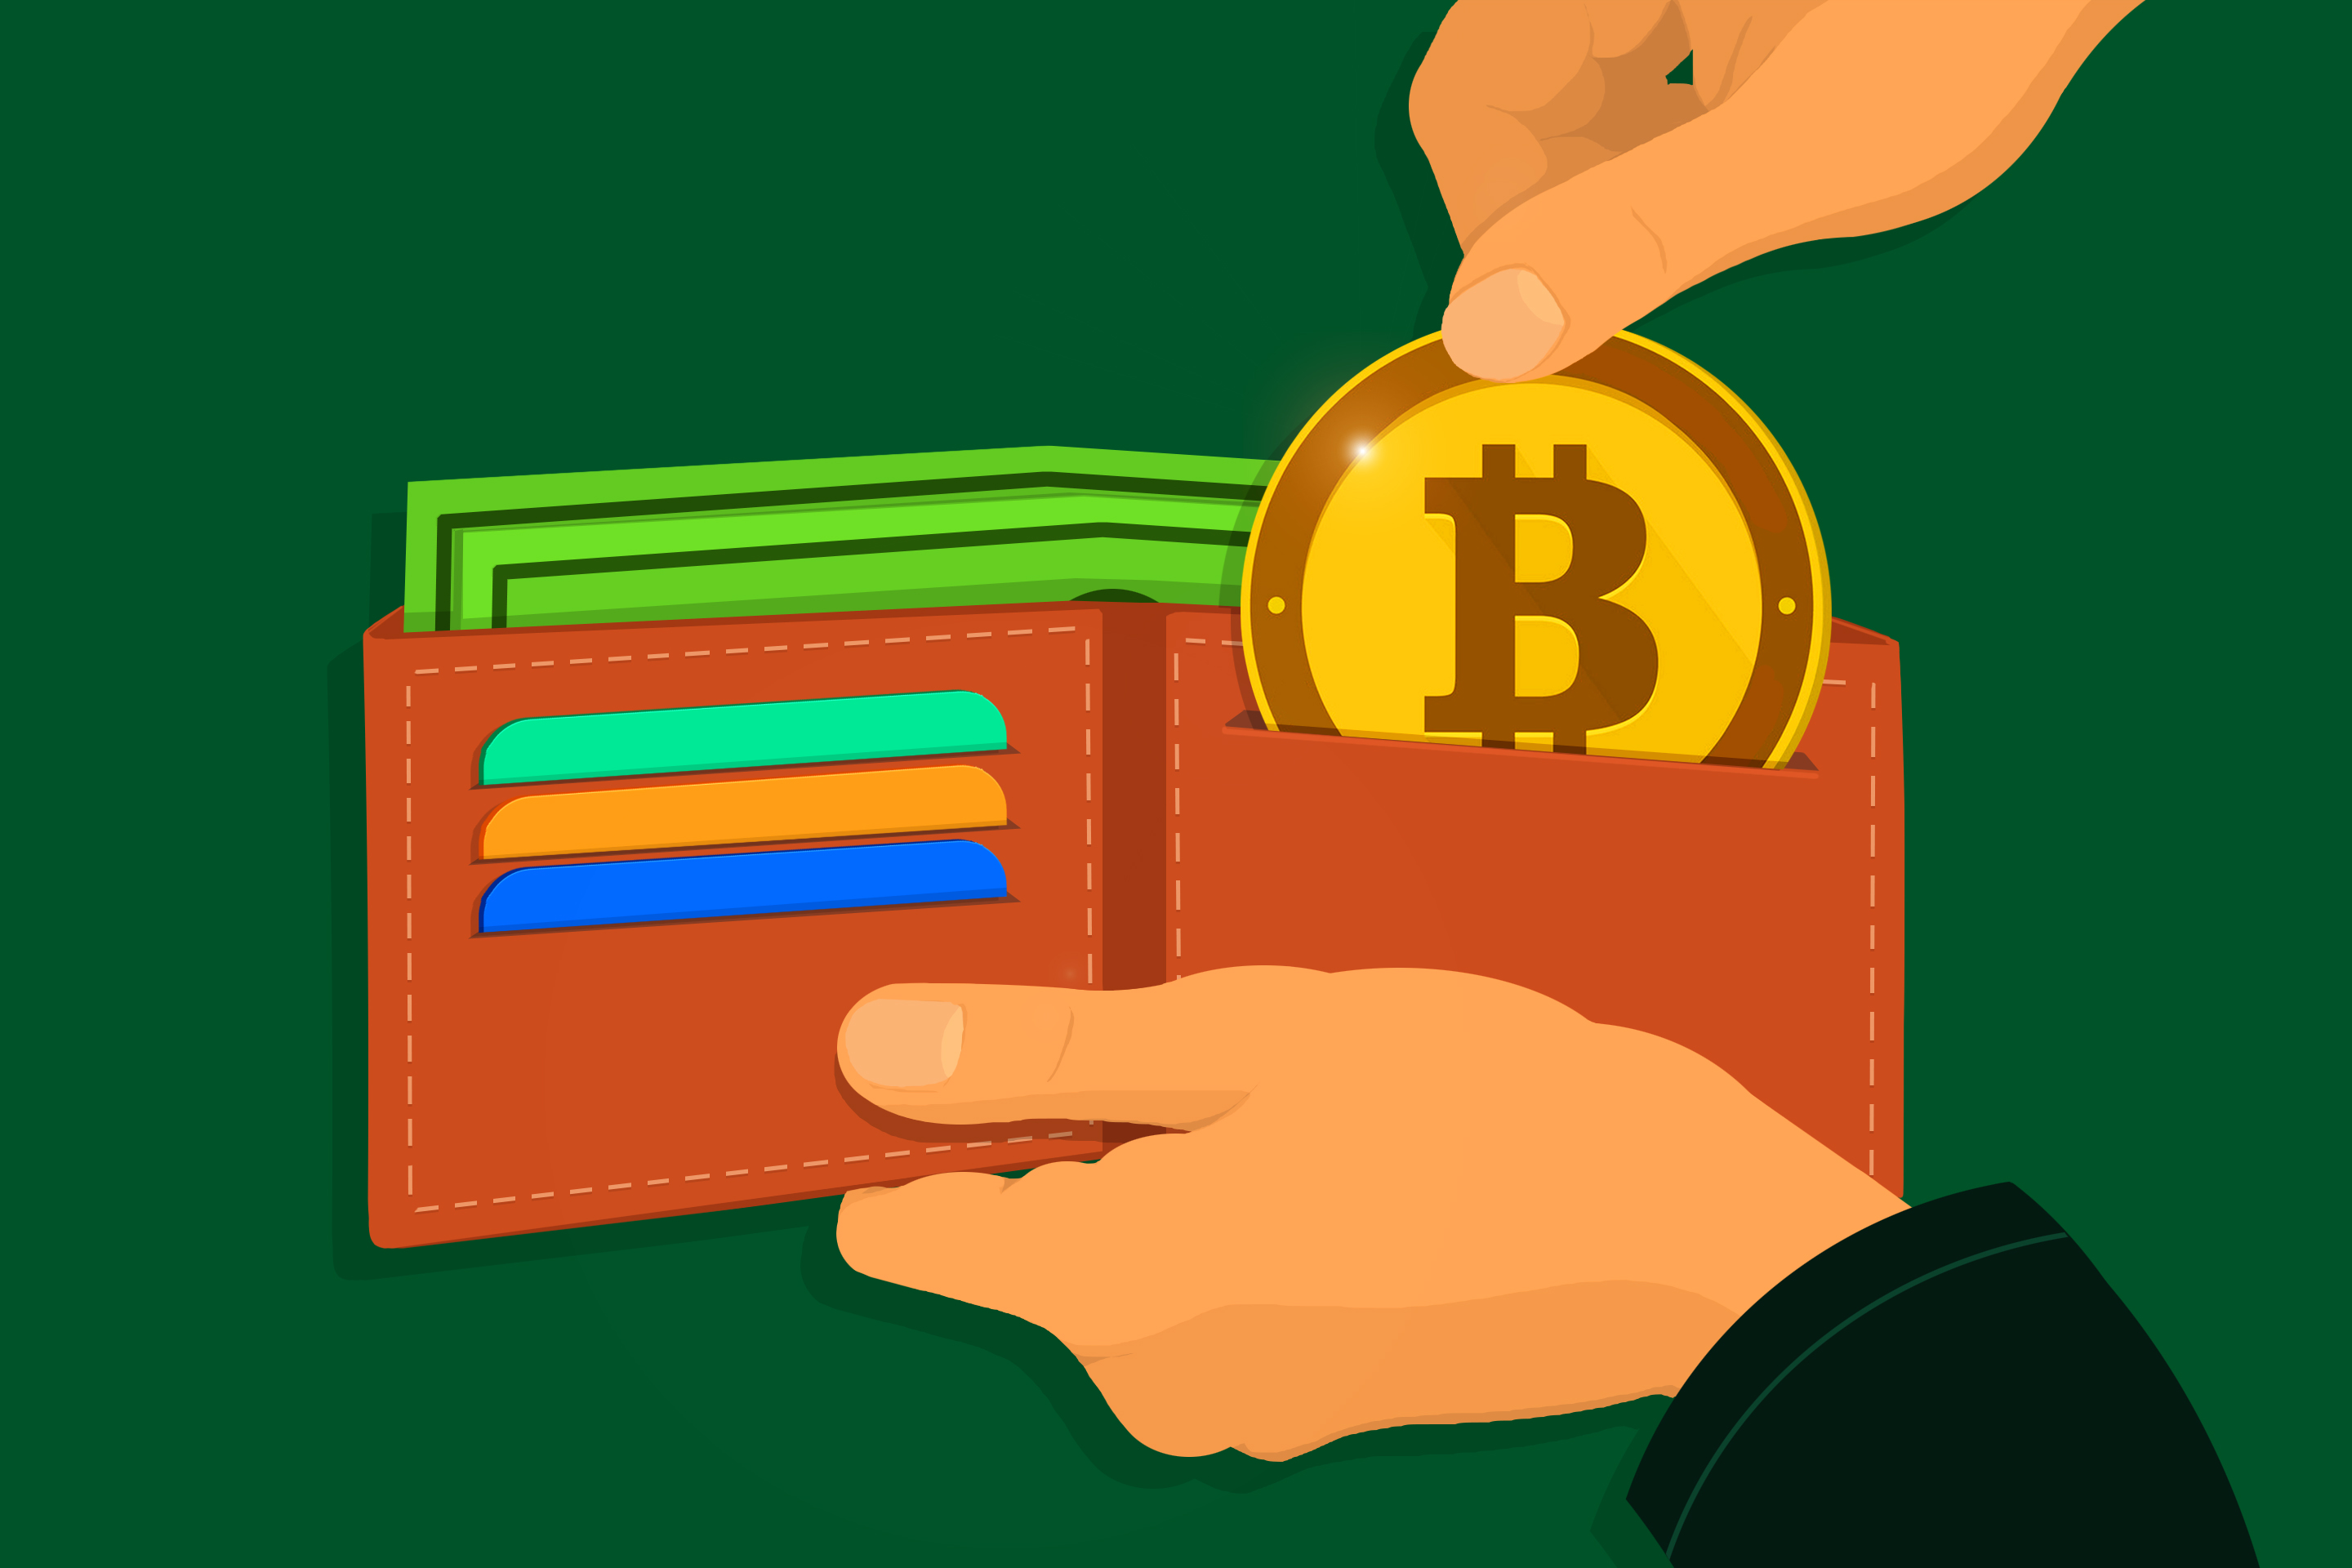 A person is pulling out bitcoin from the wallet, looking to spend it.